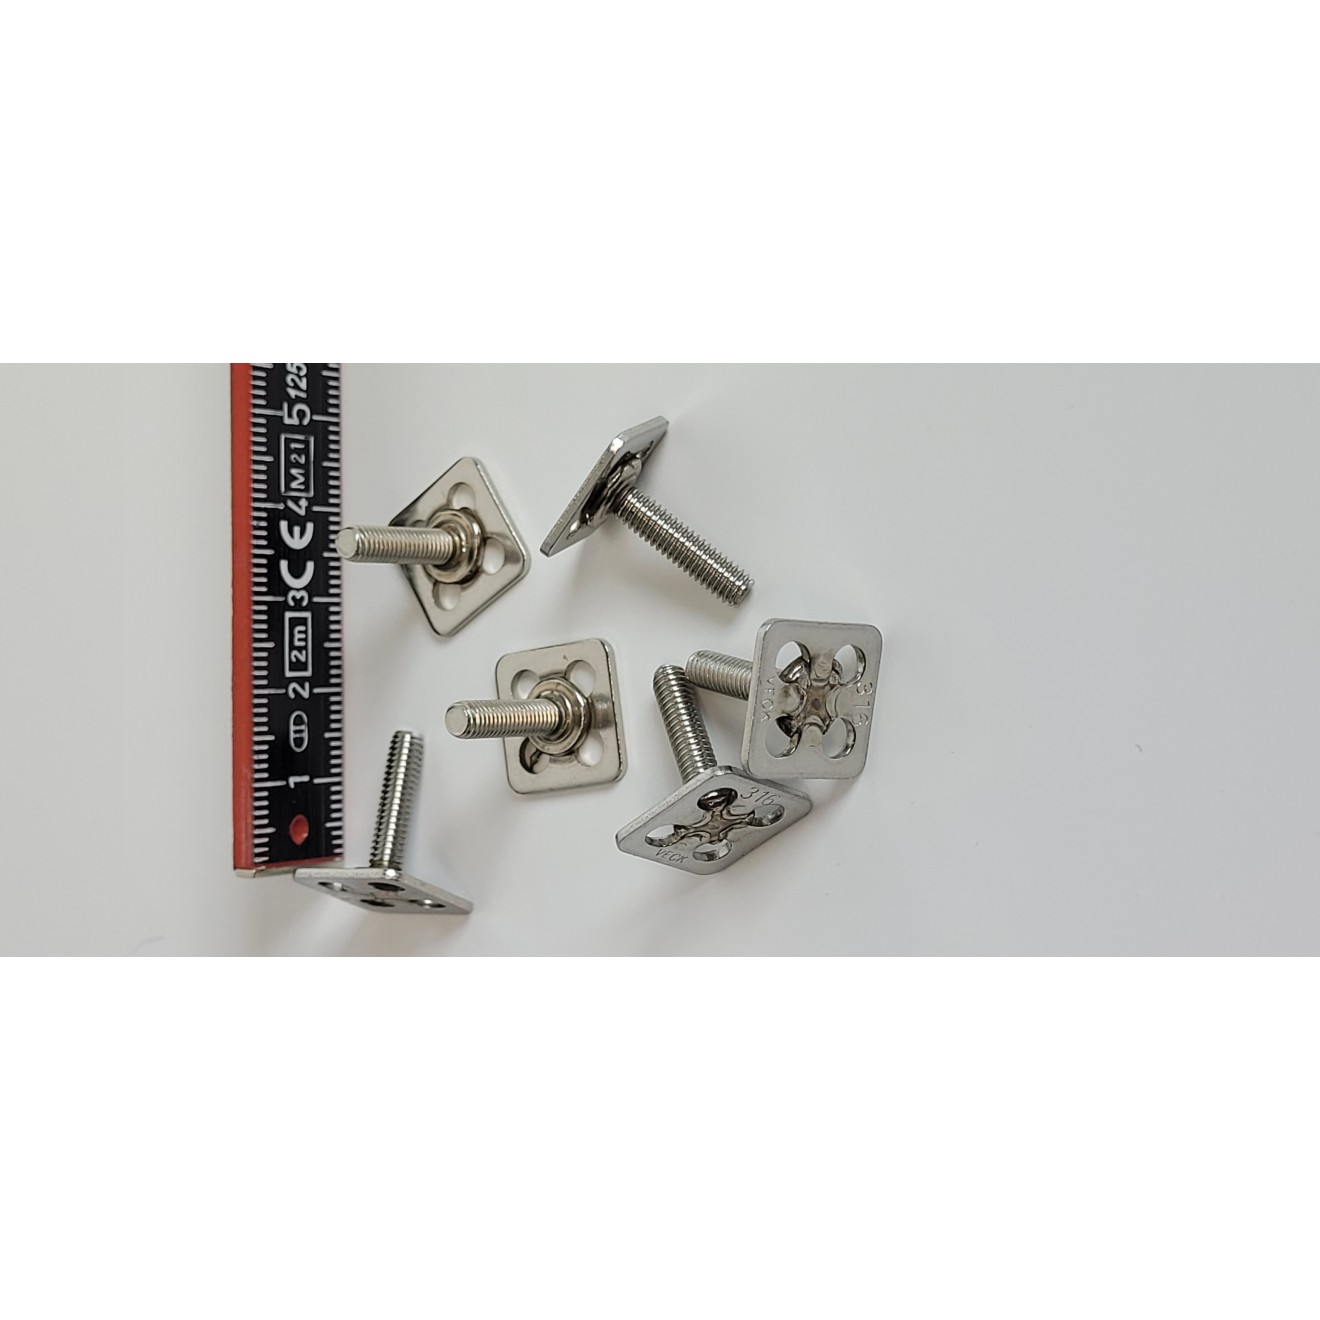 Stainless steel fasteners, male threaded stud M4x16